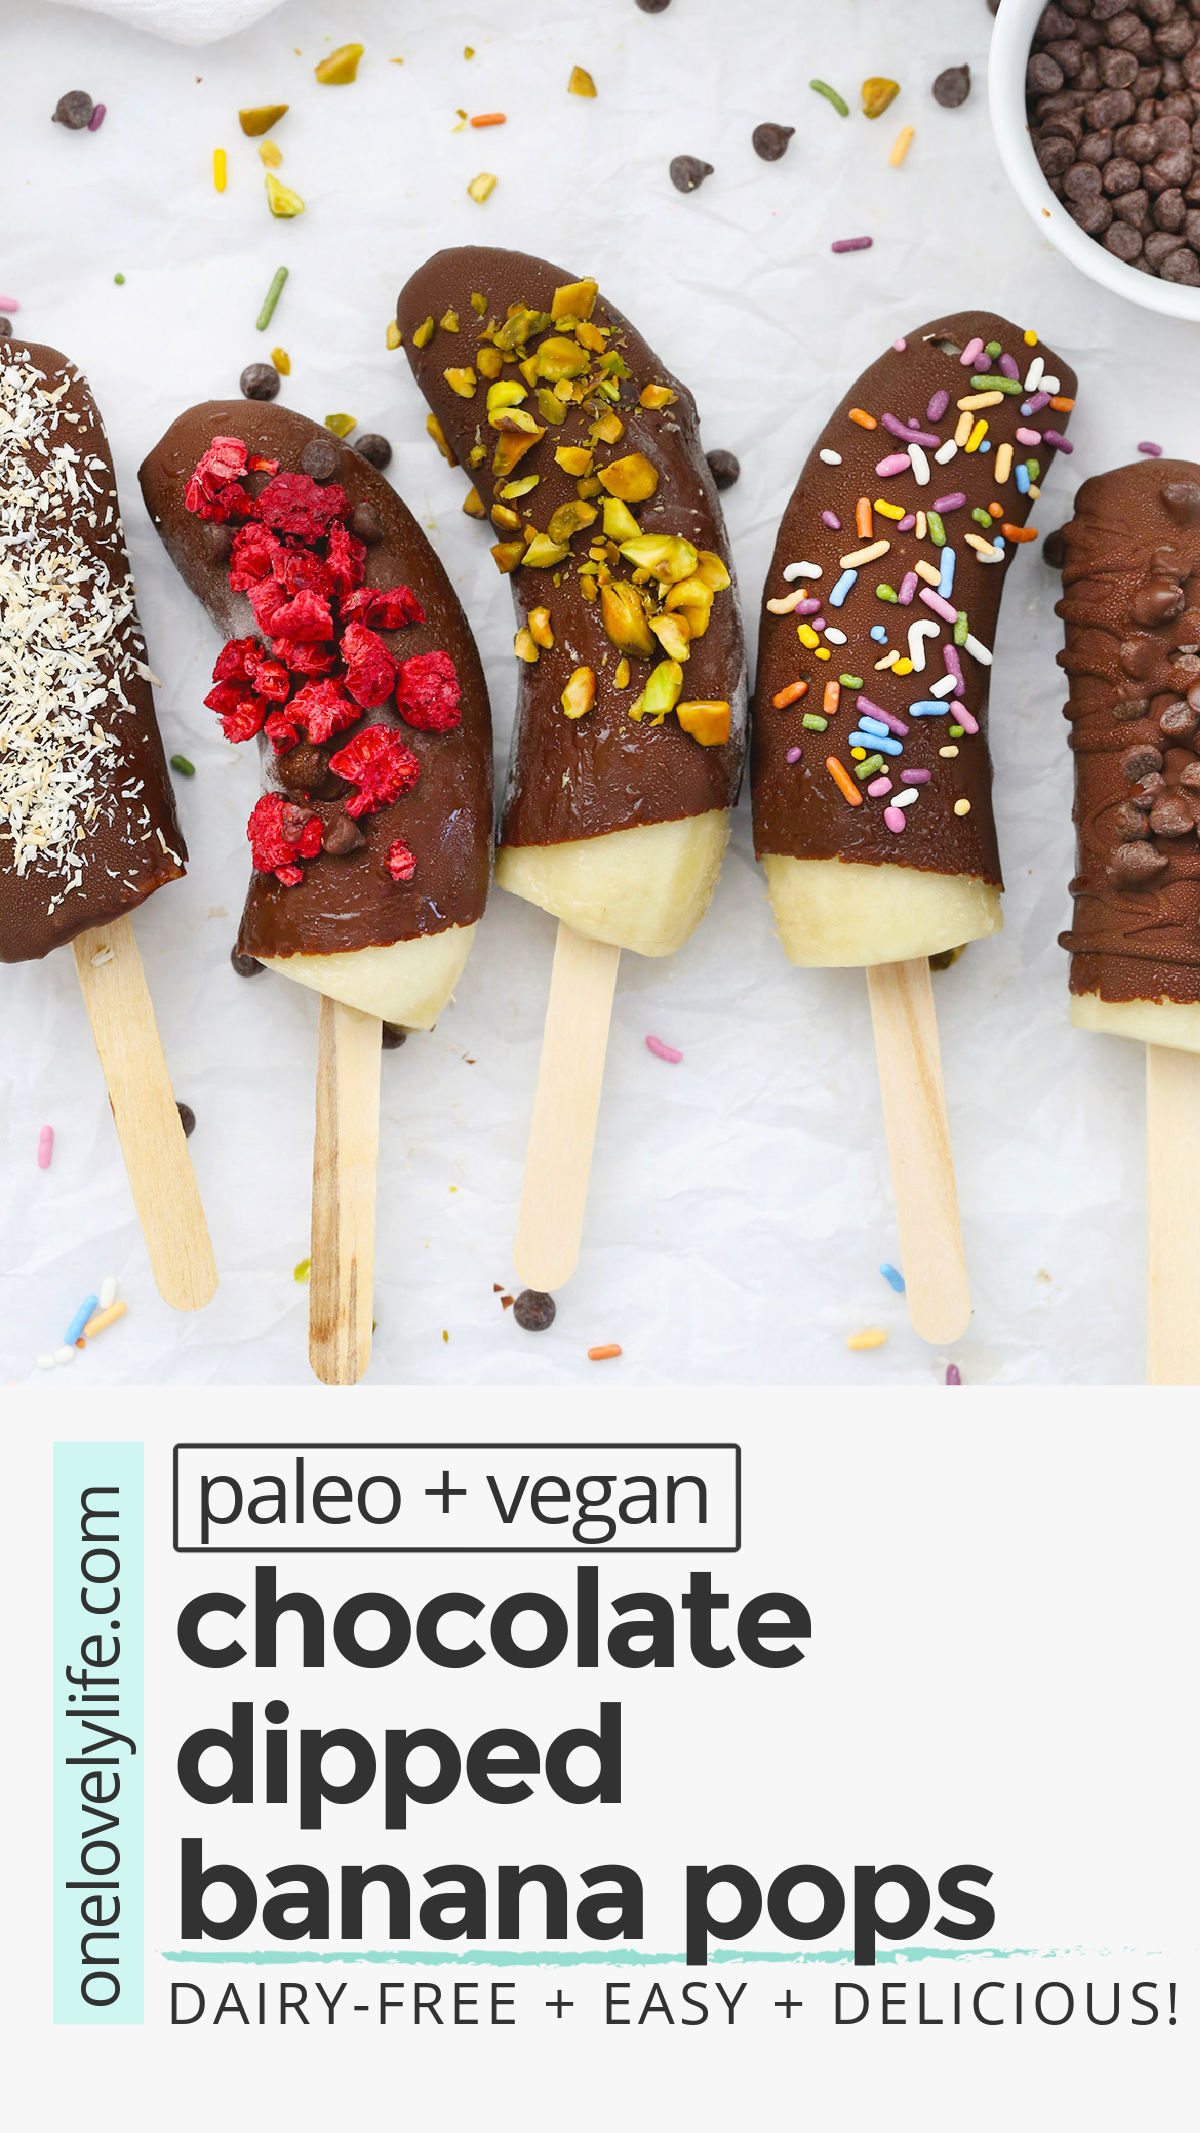 Healthy Chocolate Covered Bananas - These chocolate-dipped bananas are a delicious healthy snack or healthy dessert. Plus, they're gluten-free, vegan & paleo! // Chocolate Covered Banana Pops // Frozen Chocolate Bananas #paleo #healthytreat #healthysnack #vegan #bananas #chocolate